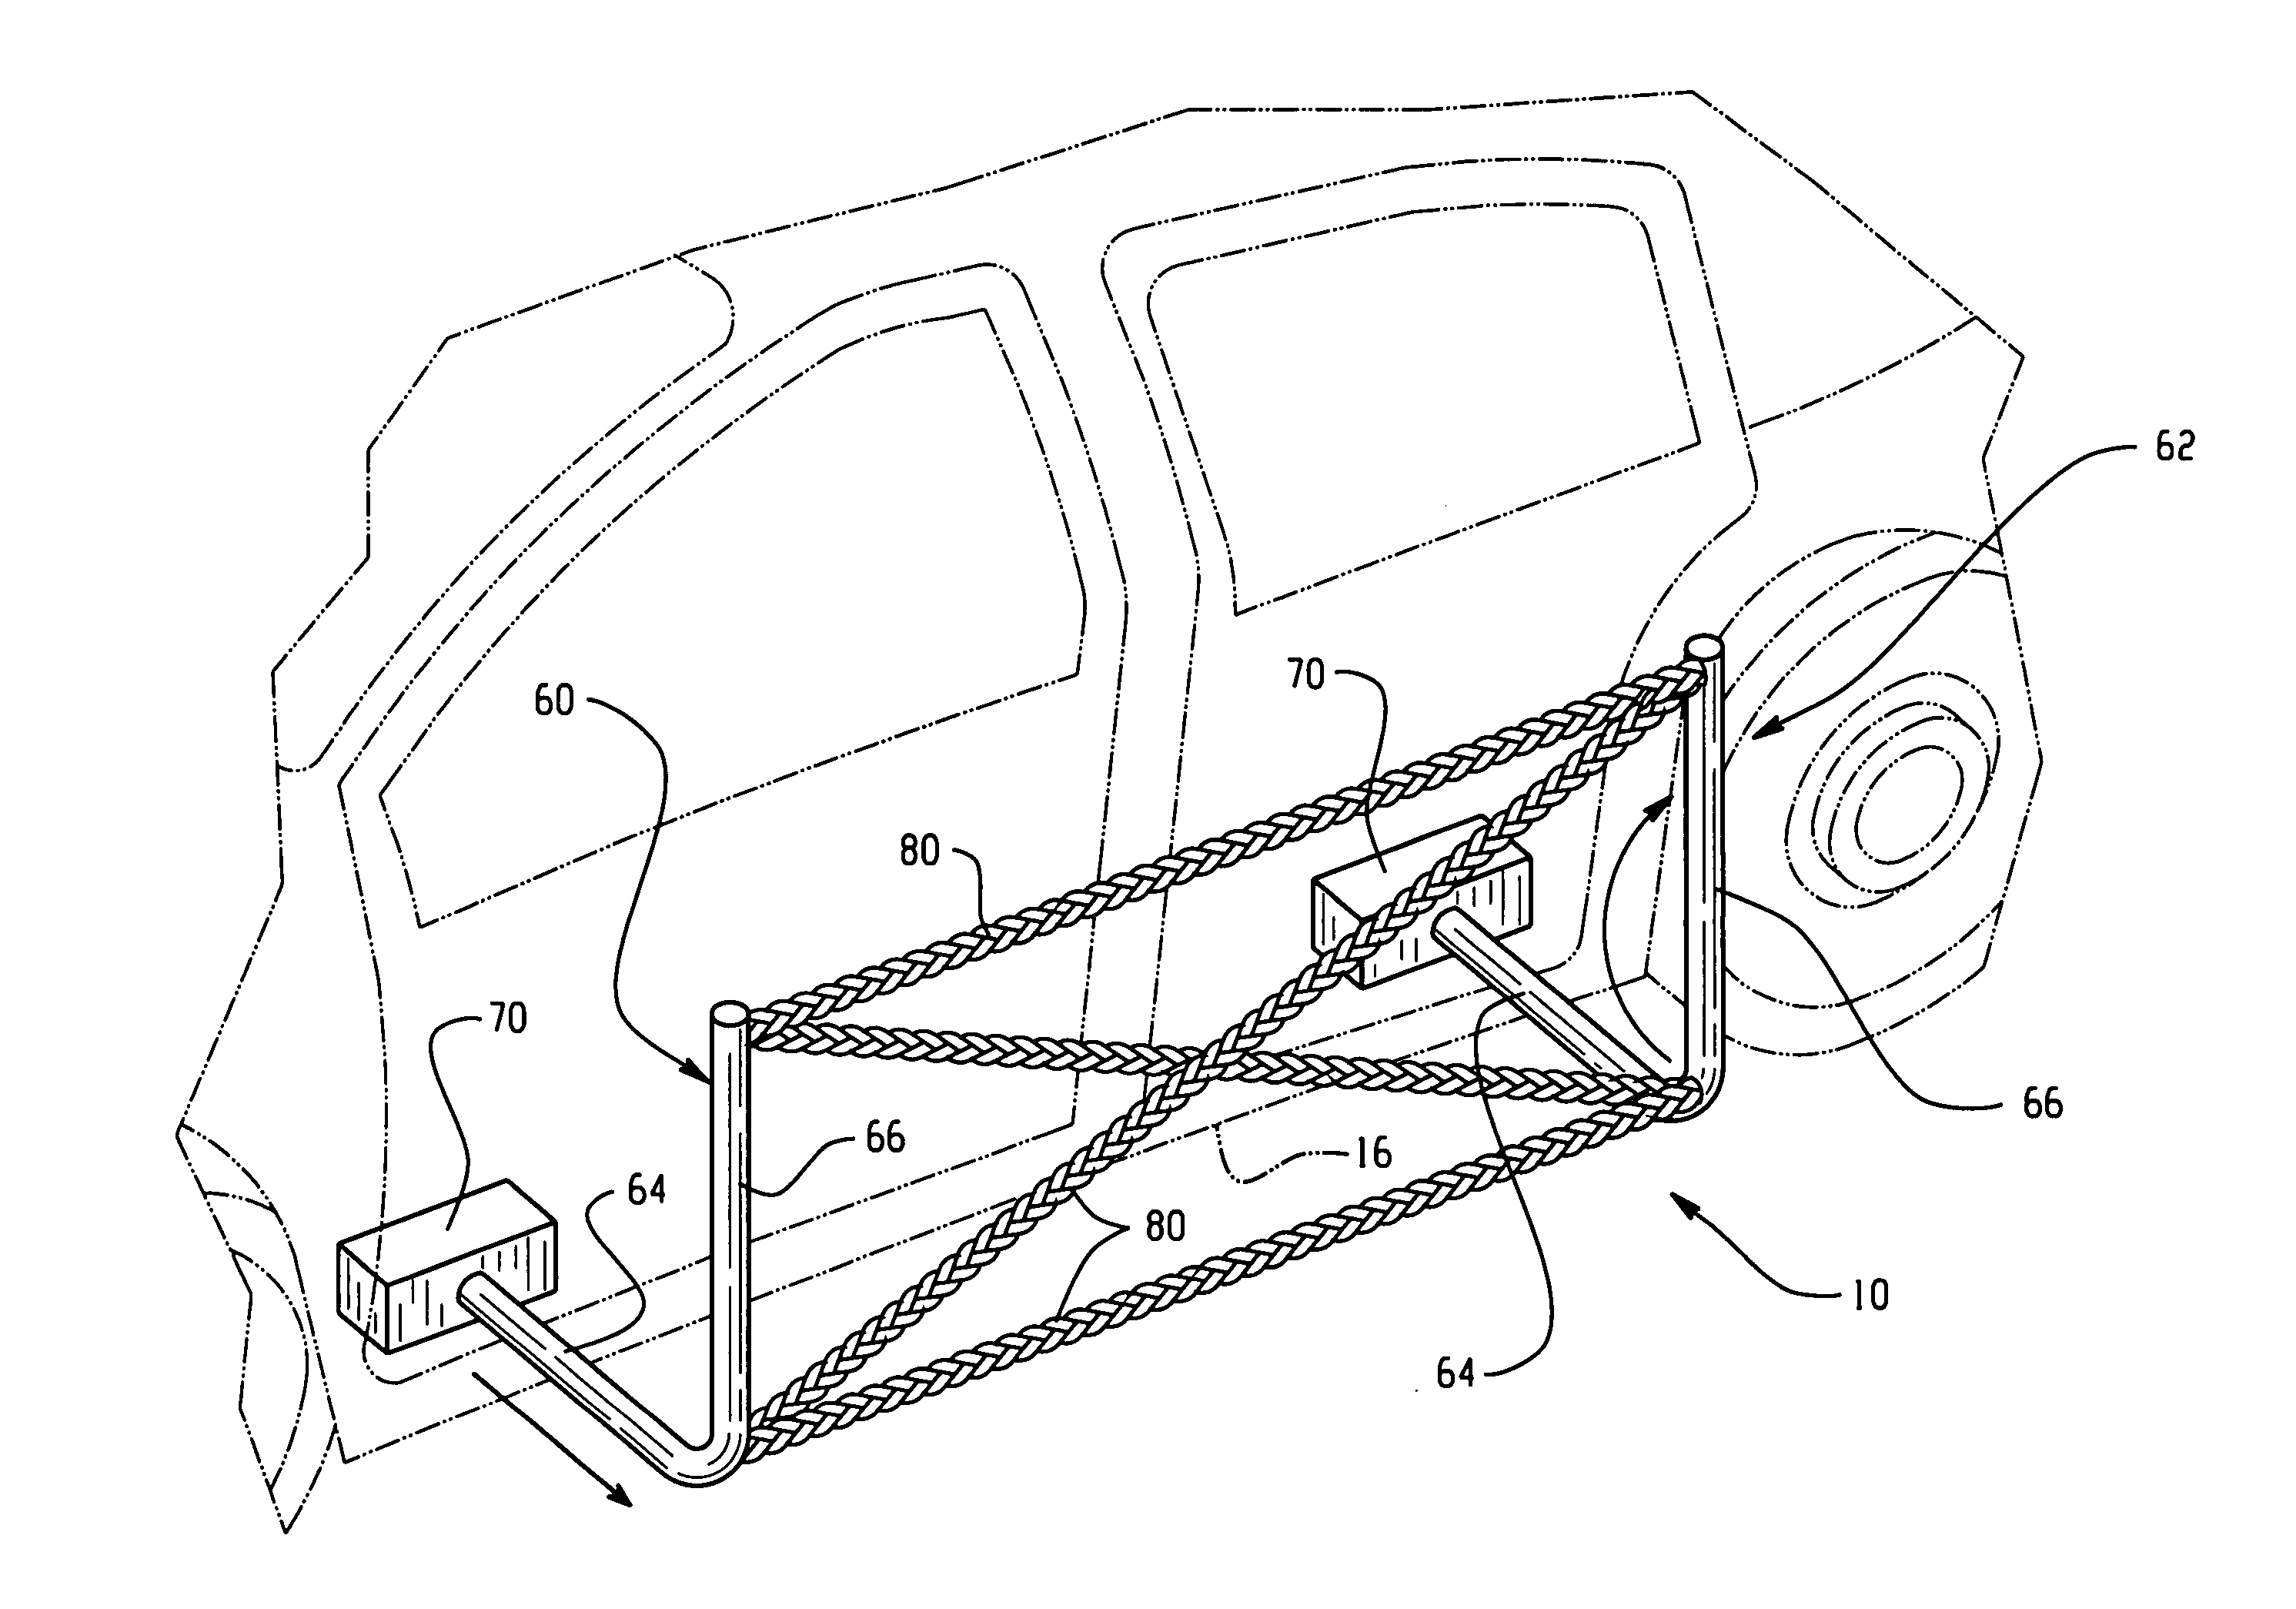 Motor vehicle body with side impact protection